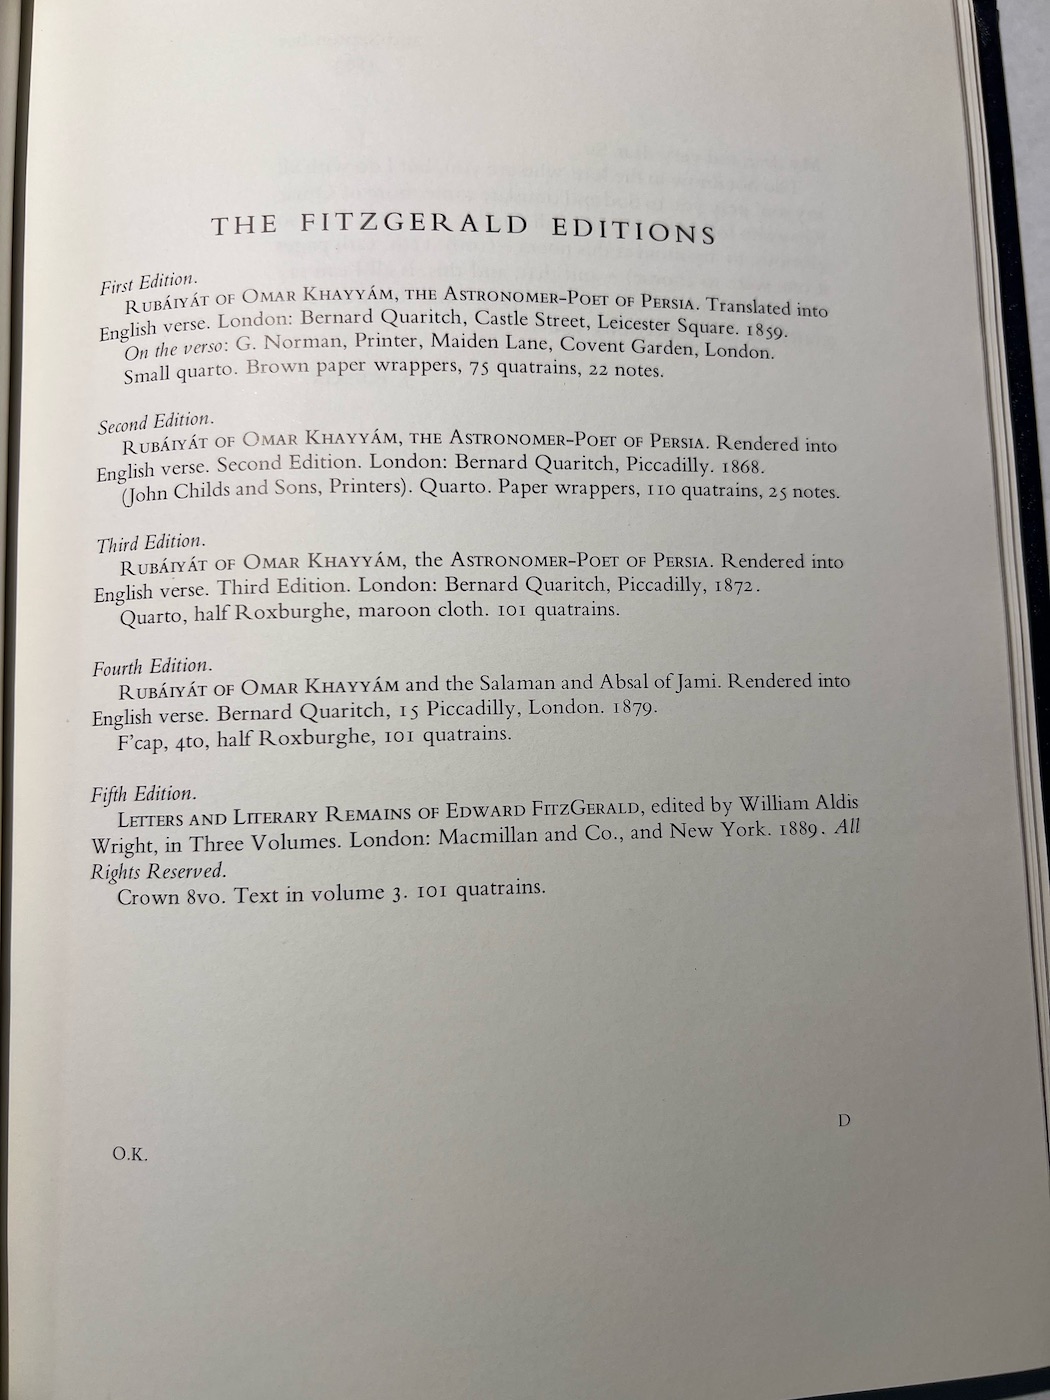 List of the FitzGerald editions